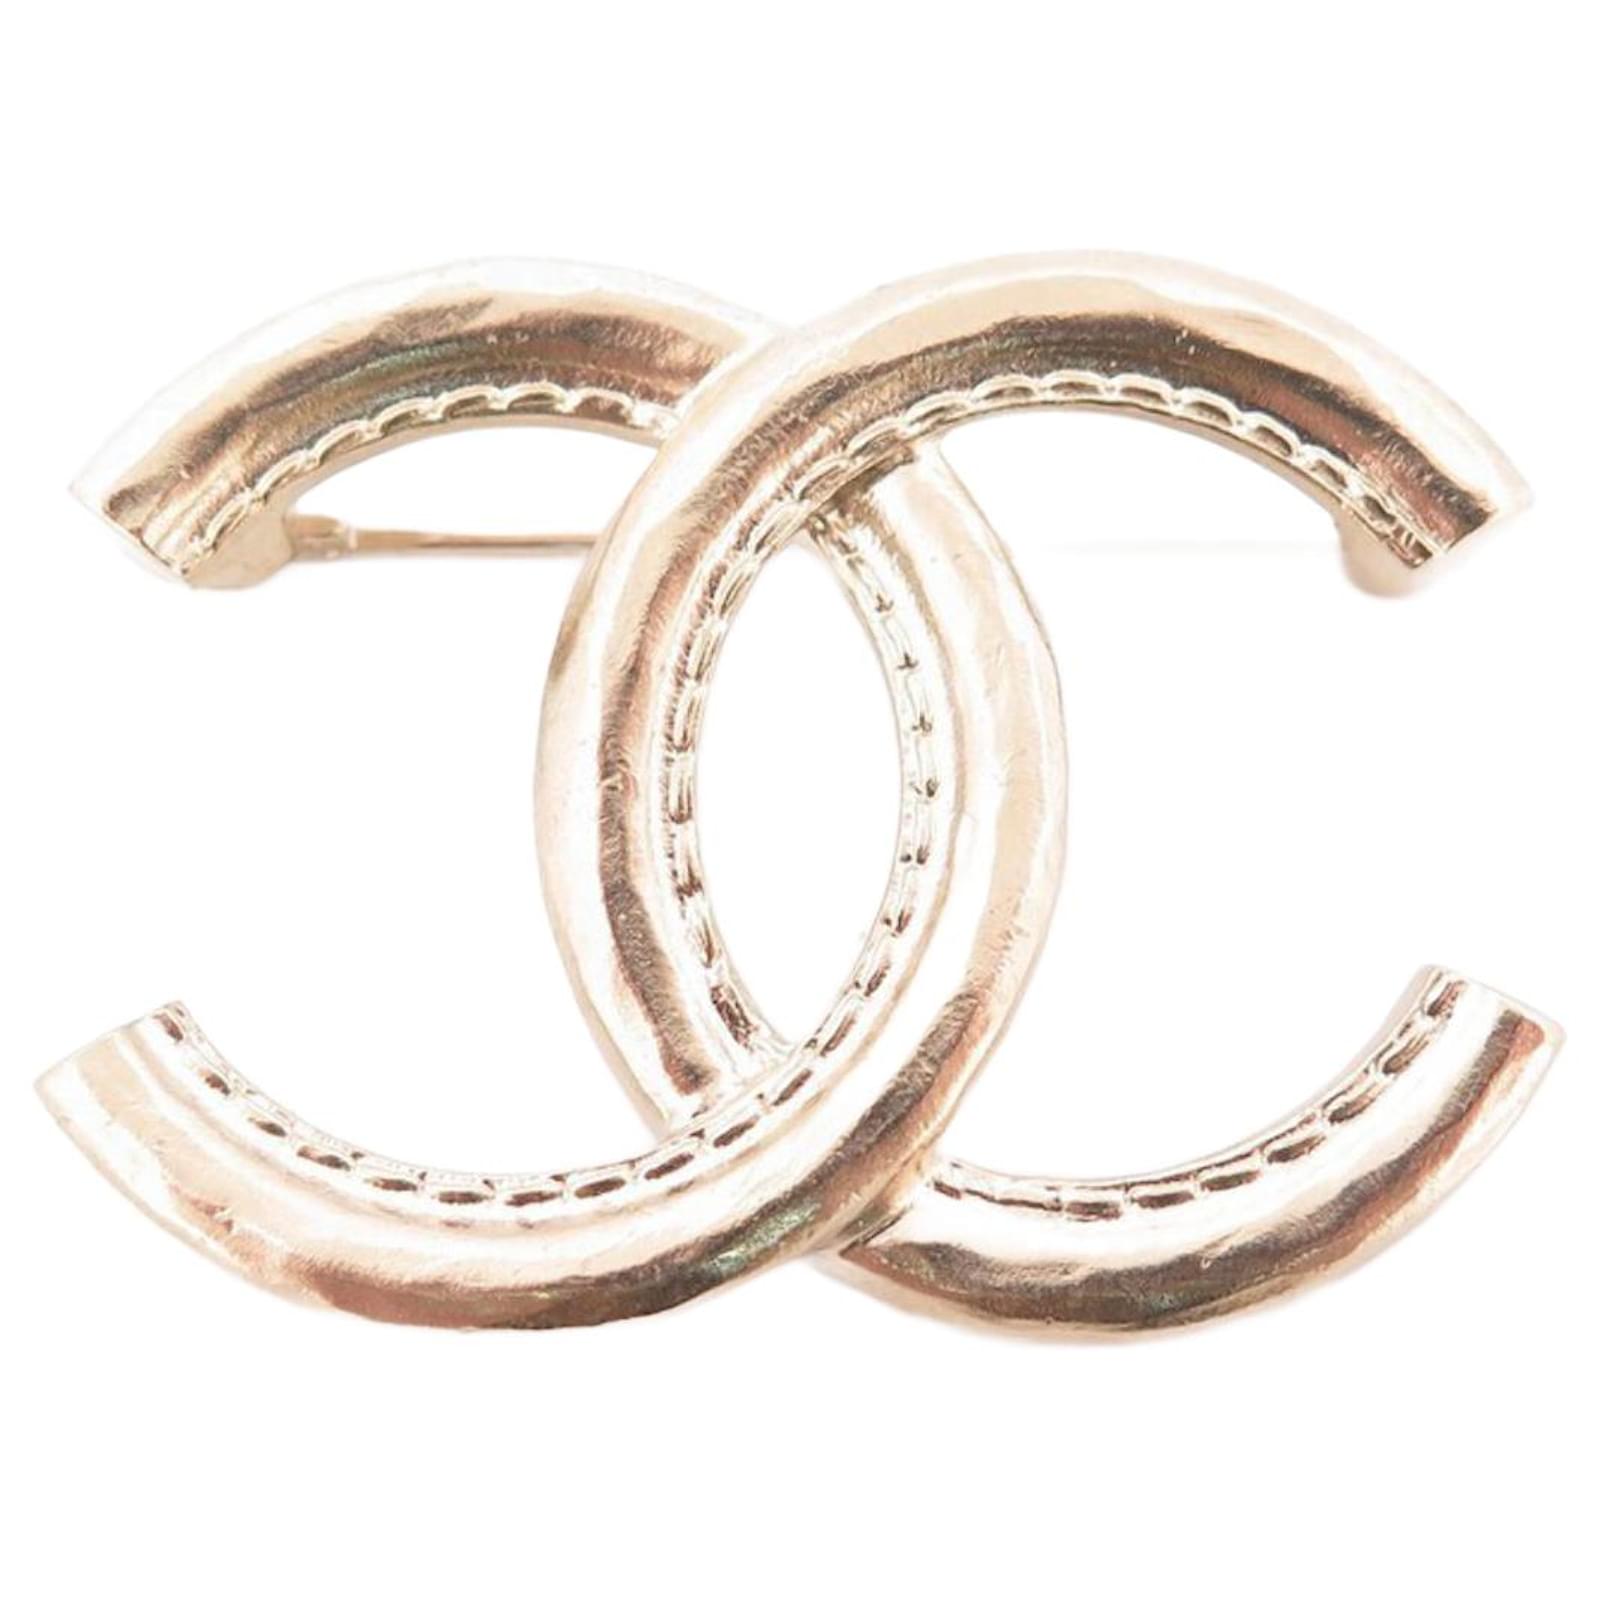 AUTH. NWT 2022 CHANEL LARGE BROOCH PIN CC LOGO WOVEN BLACK LEATHER/ GOLD  METAL